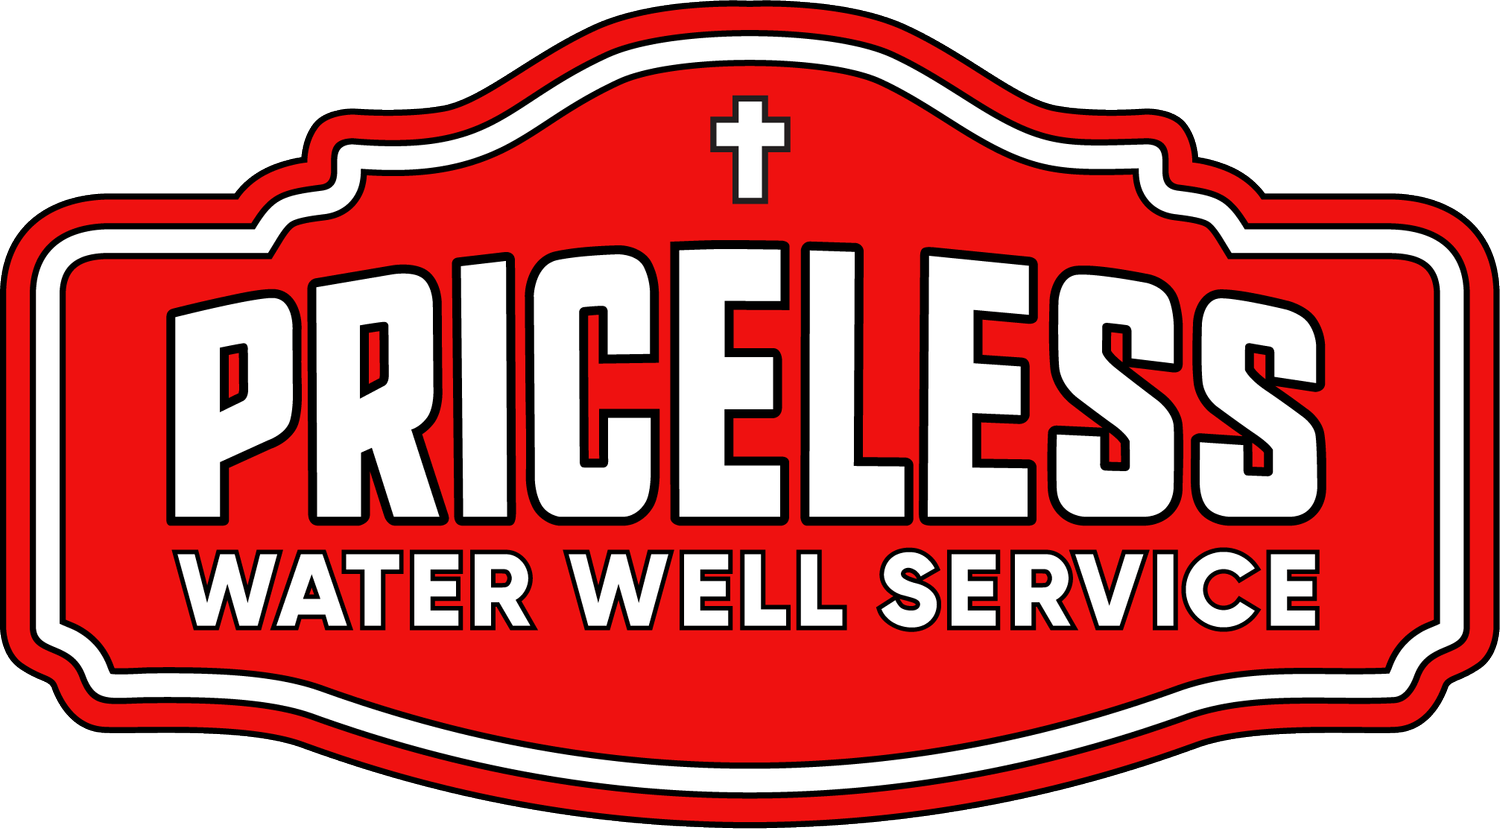 Priceless Water Well Service - DFW Service, Repair, Drilling &amp; Filtration | Same-Day or Next-Day Service!